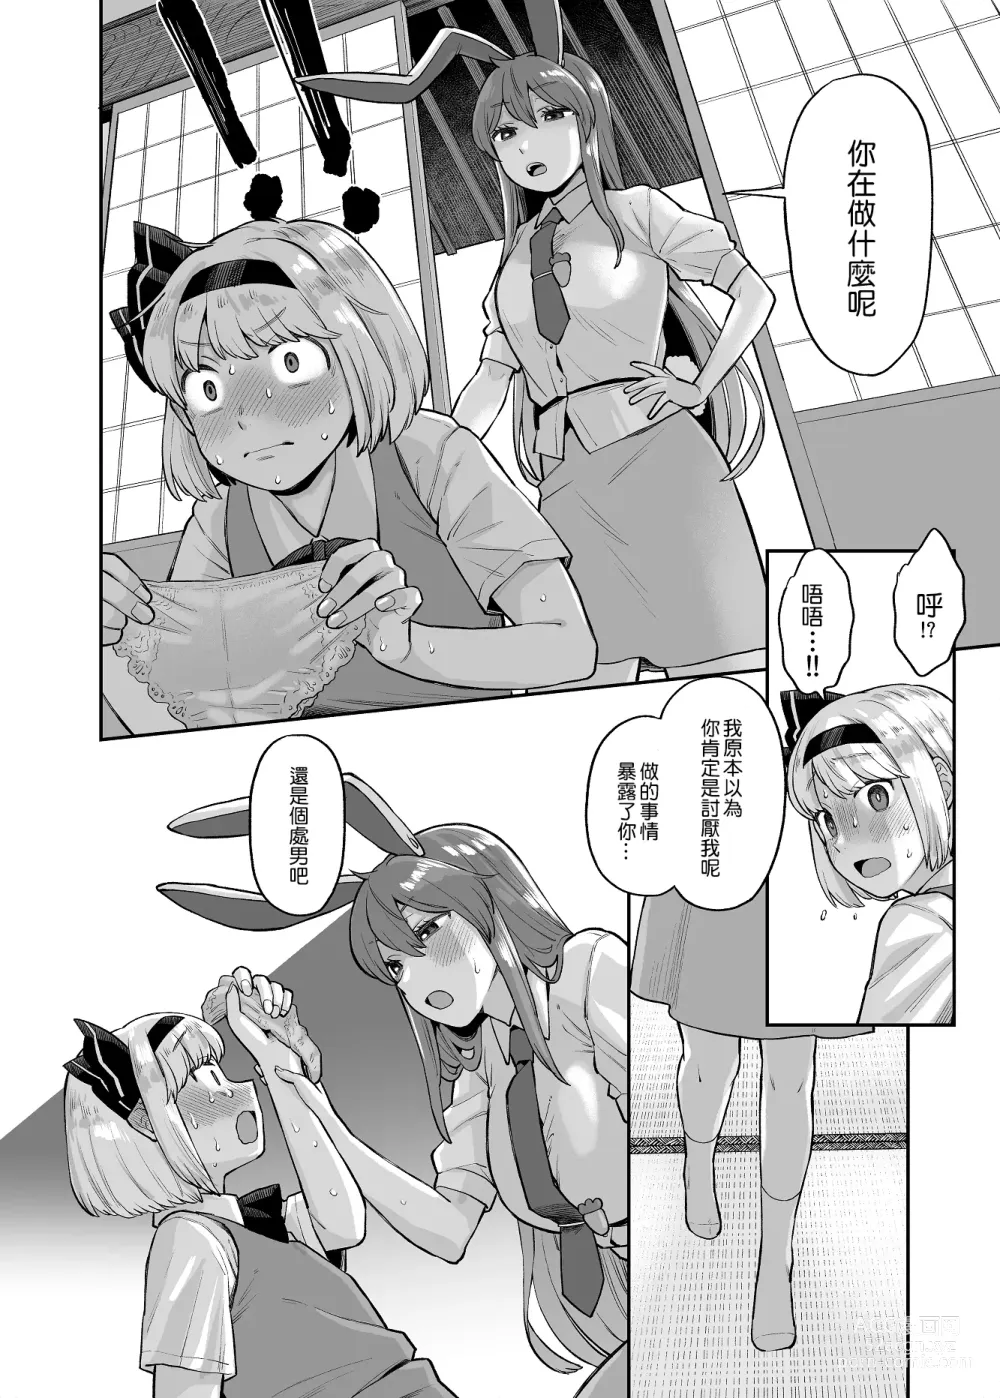 Page 8 of doujinshi 乌冬铃仙系列第2话